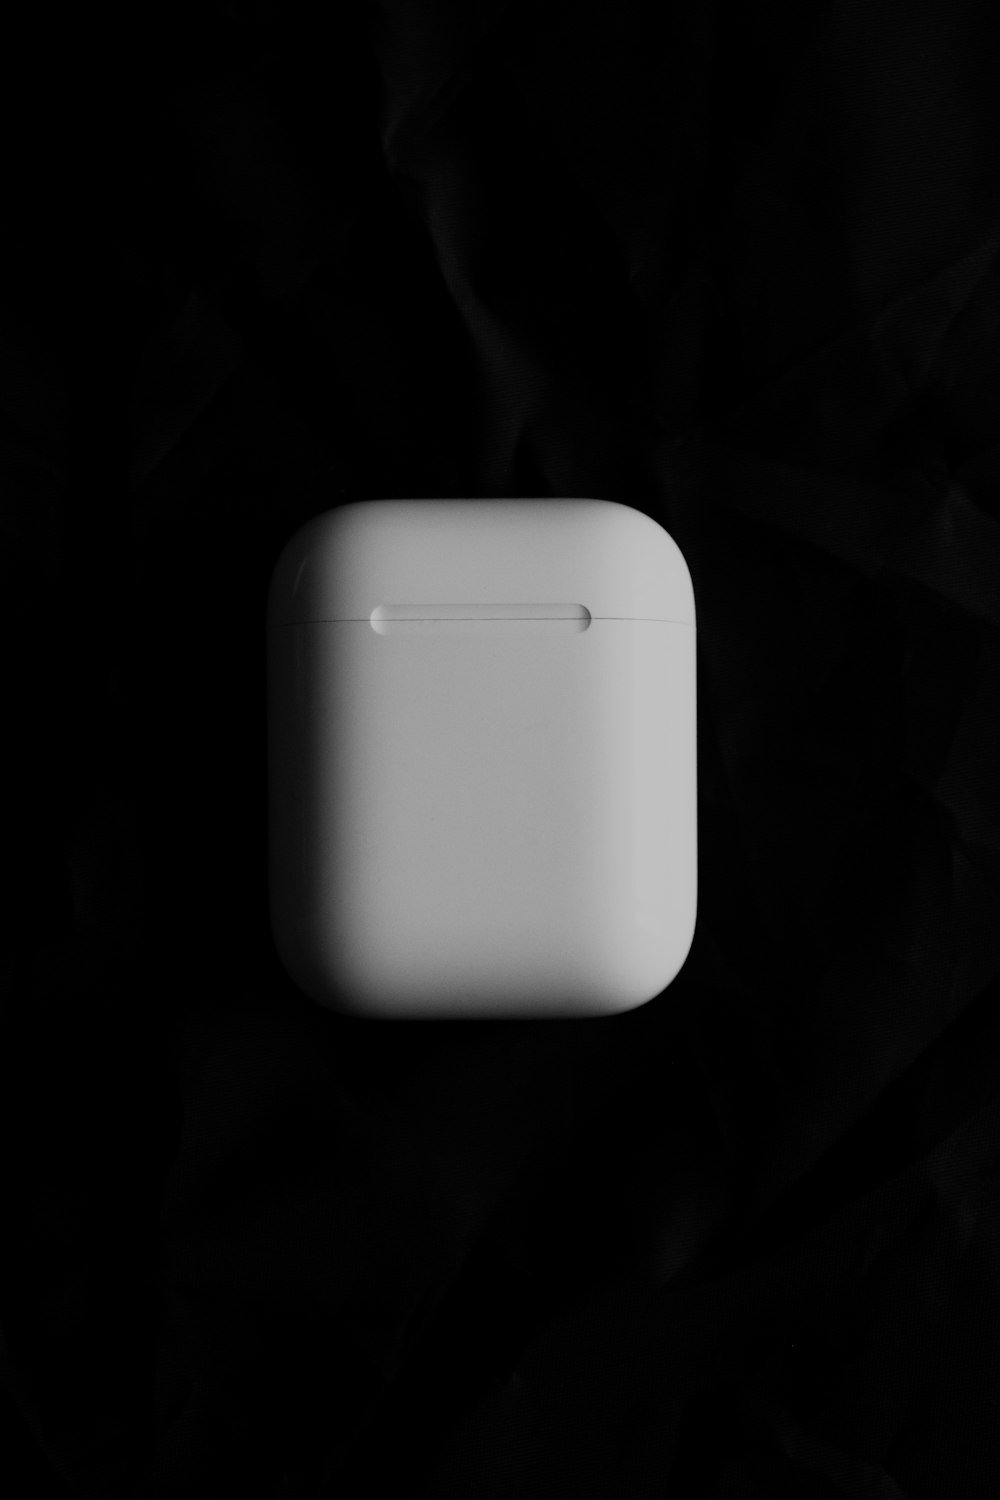 an apple airpods sitting on top of a black surface